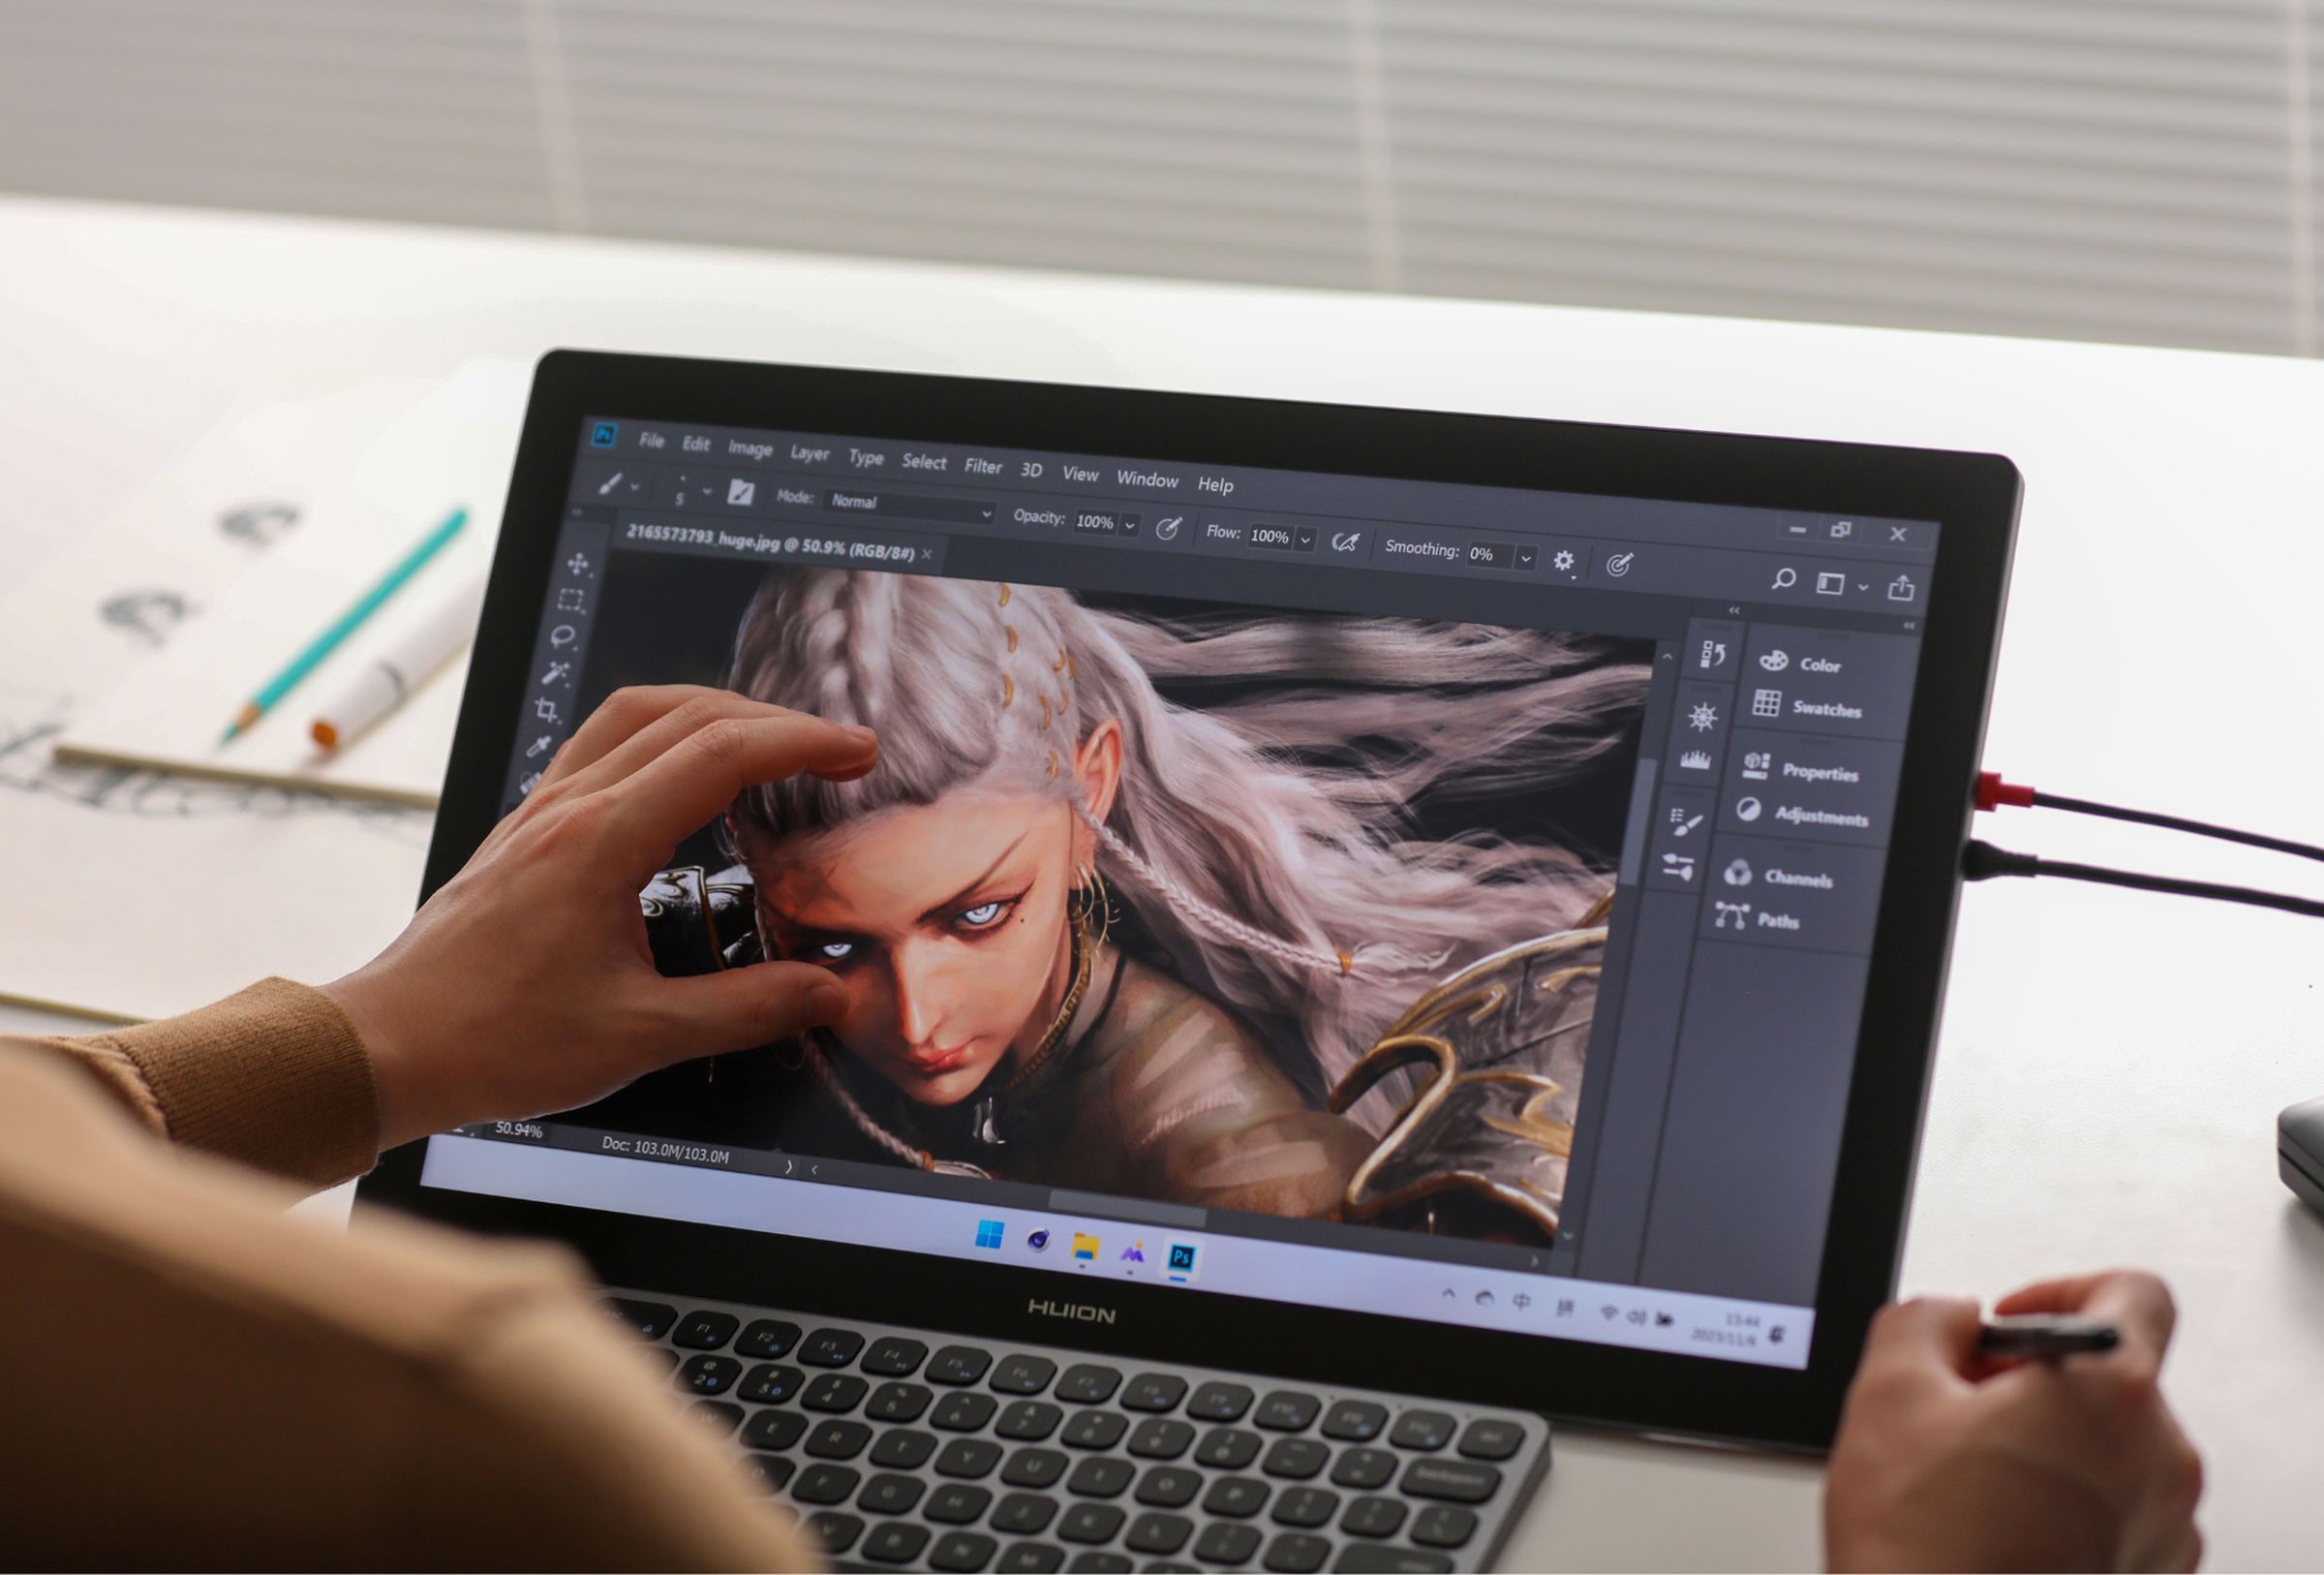 The Huion Kamvas Pro 19 being used with touch control support.